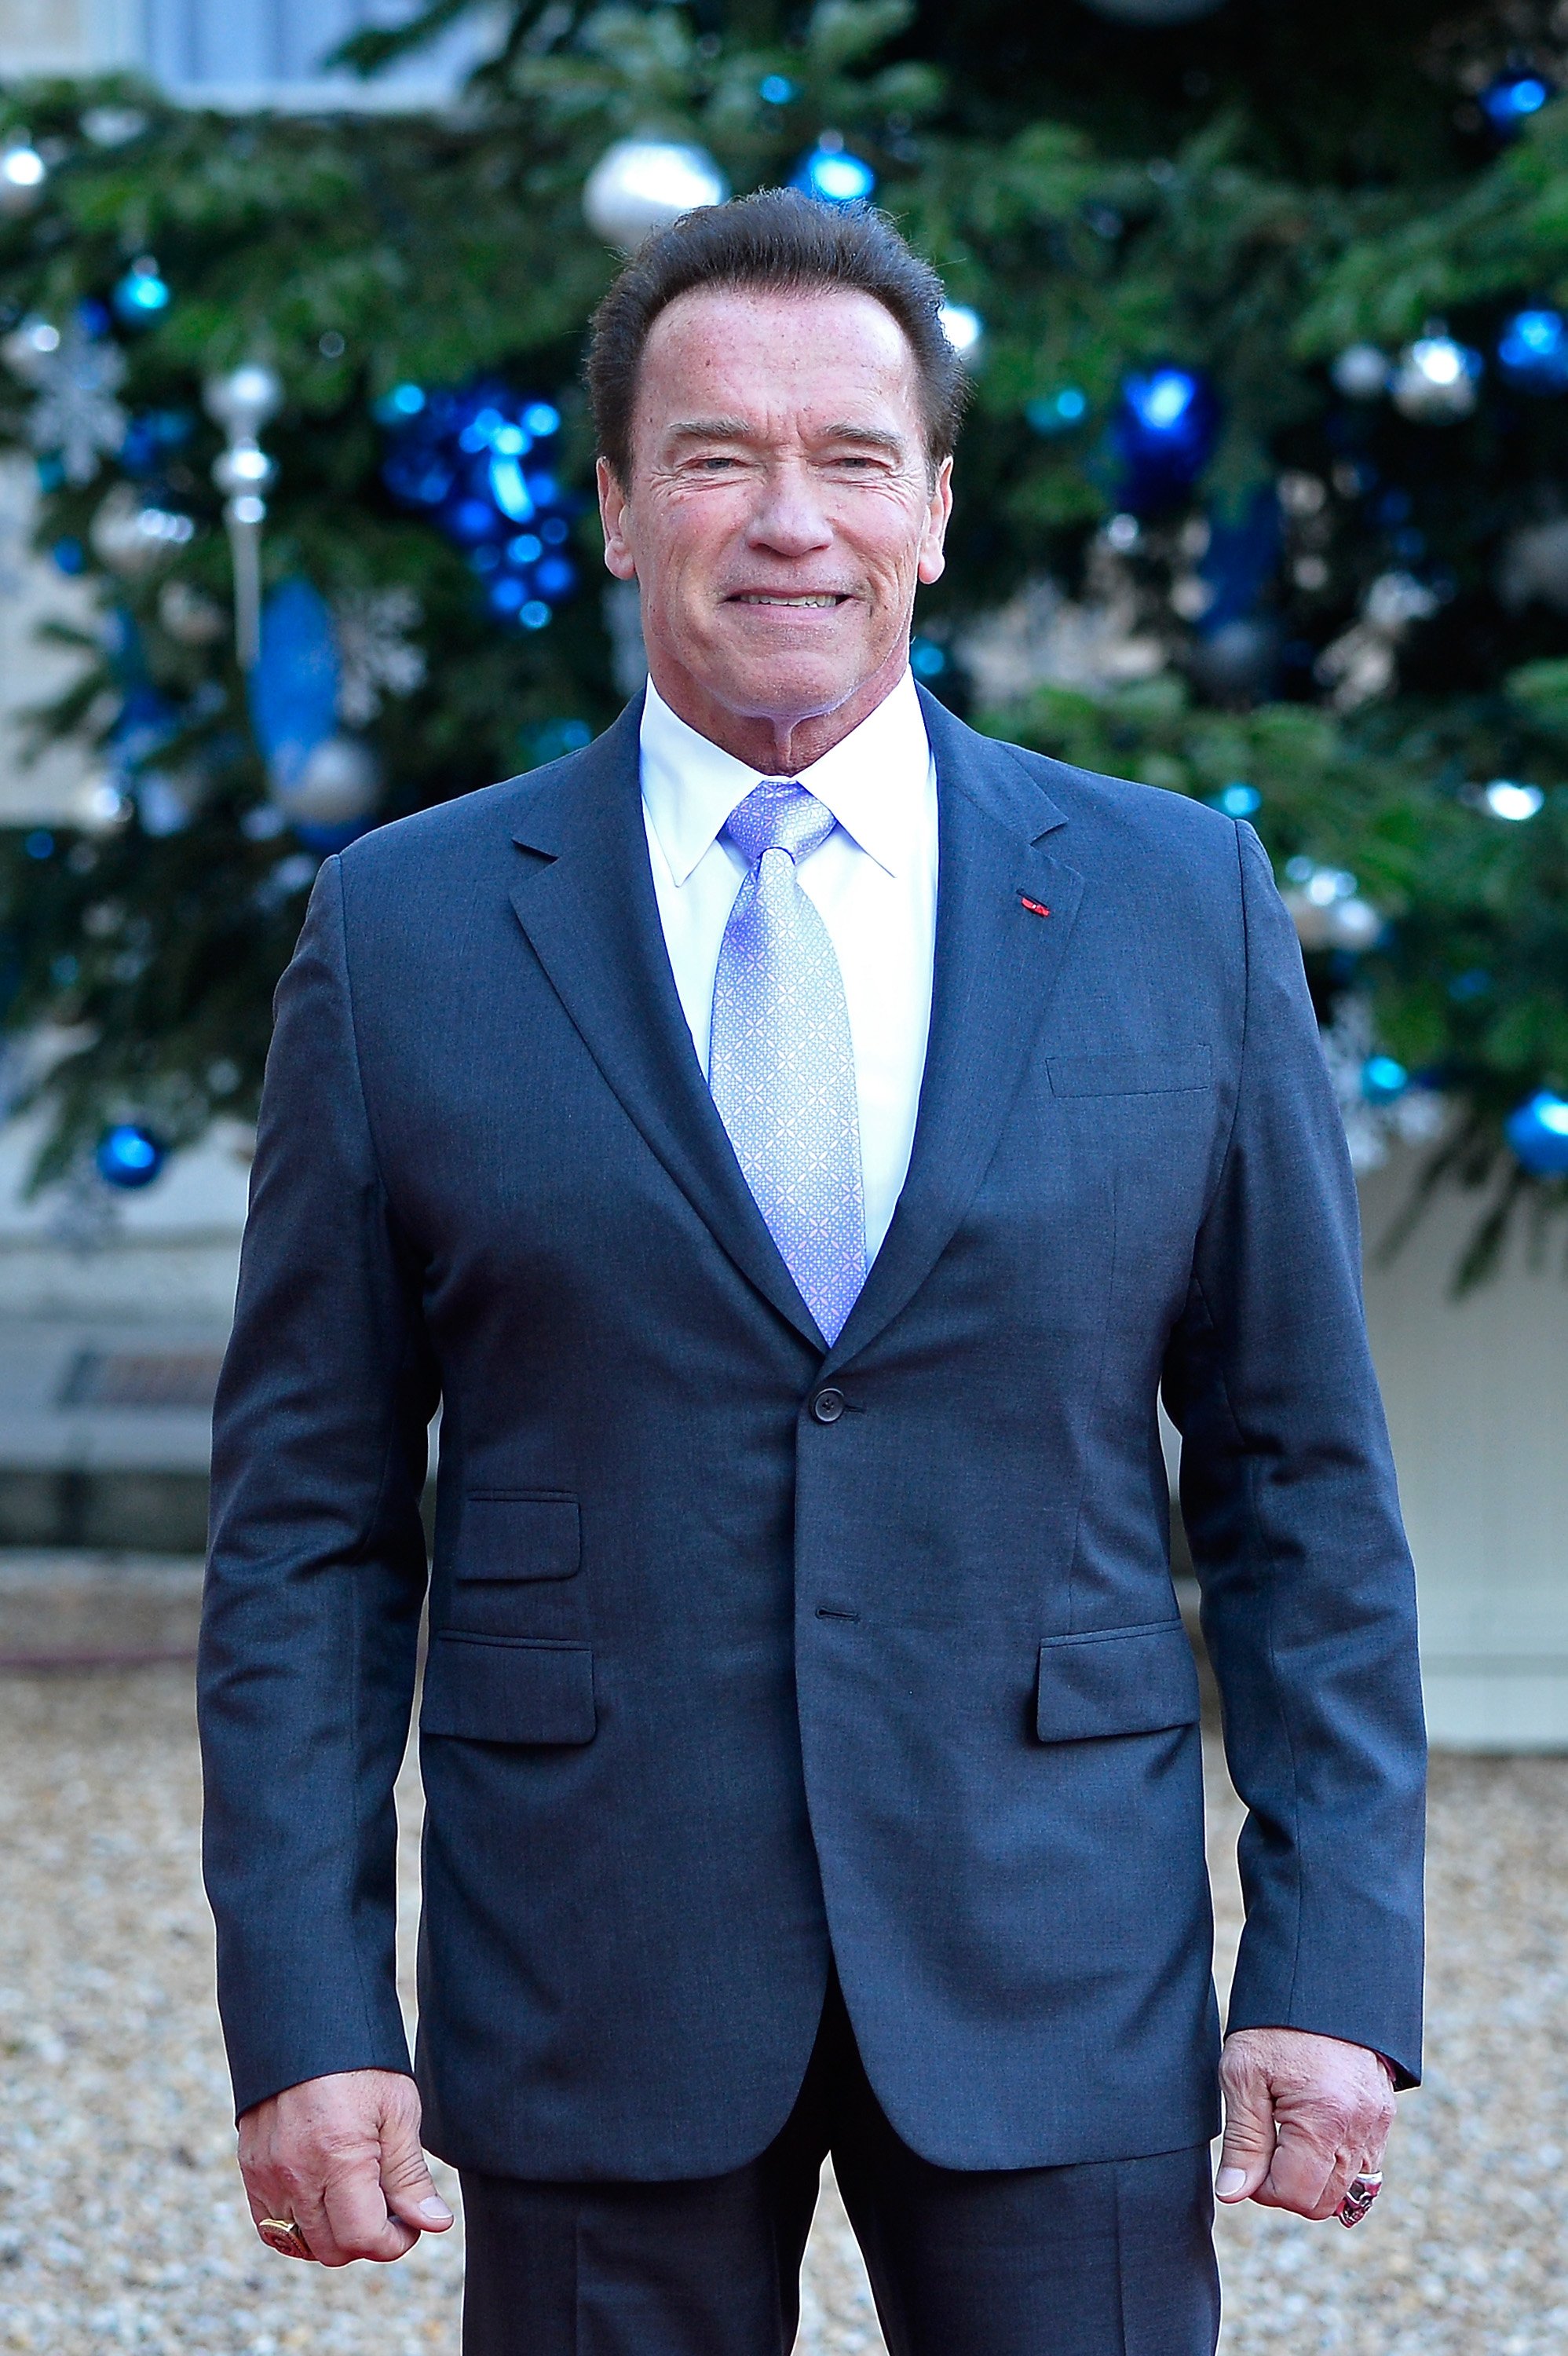 Arnold Schwarzenegger arrives for a meeting with French President Emmanuel Macron on December 12, 2017, in Paris, France. | Source: Getty Images.